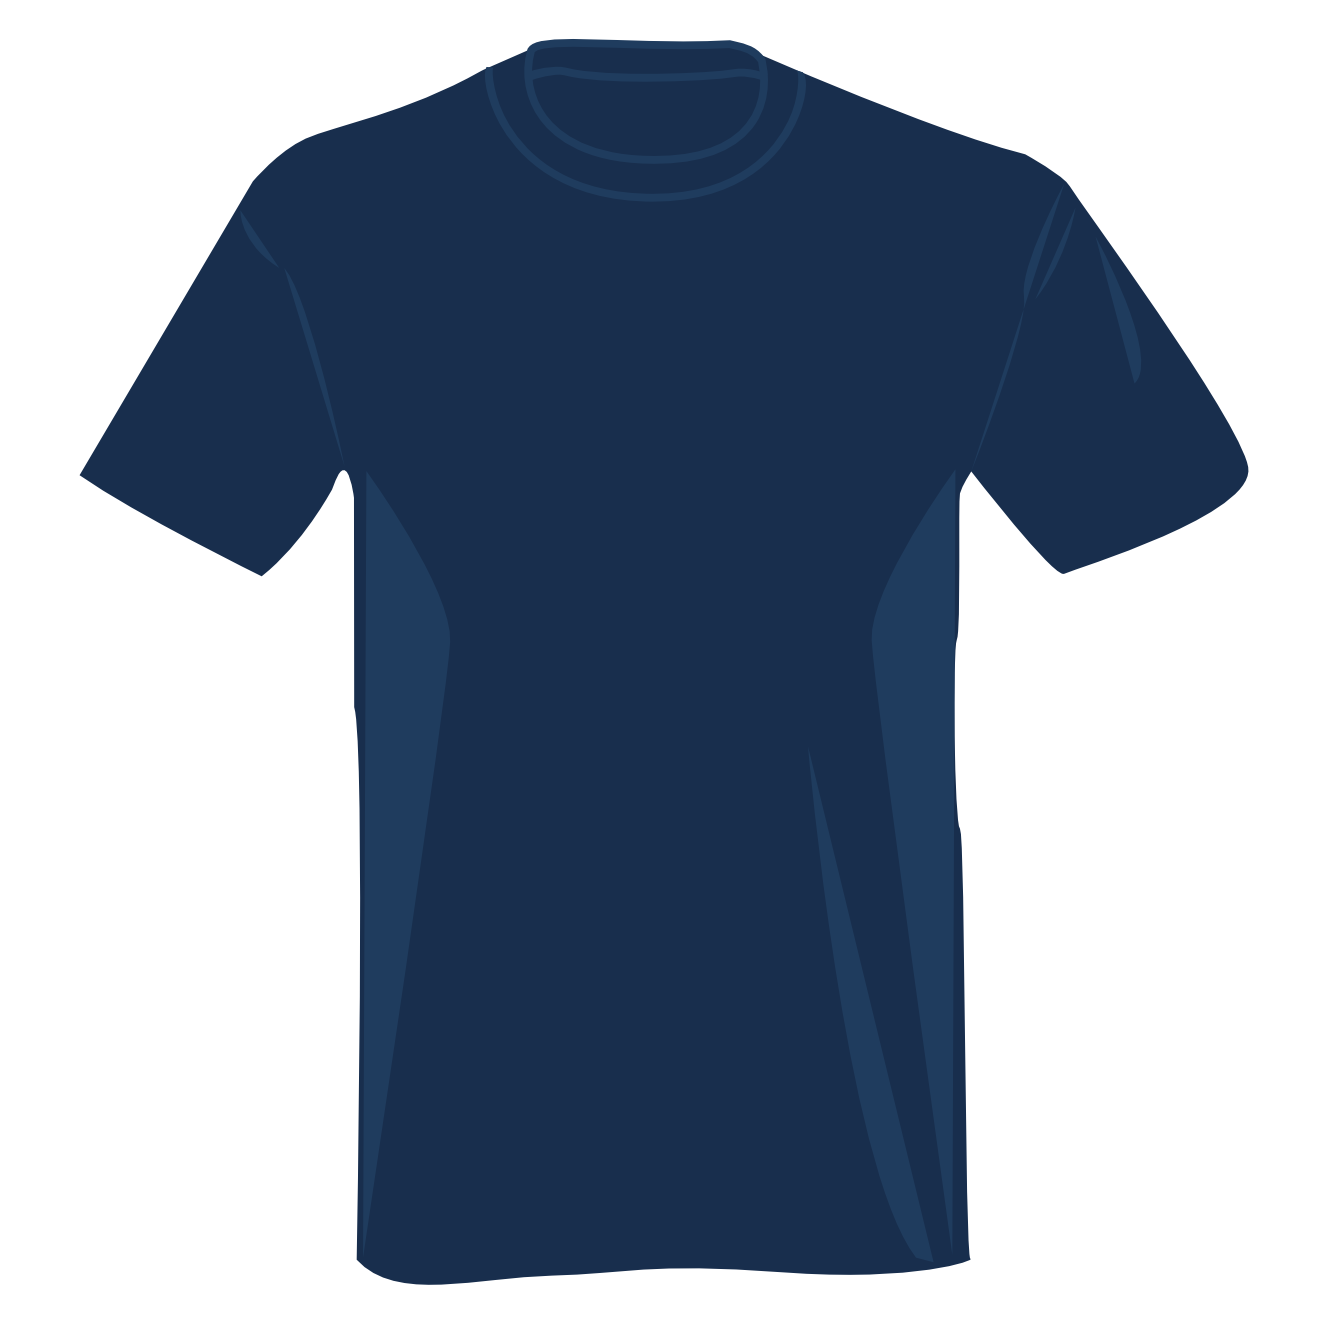 Free Clipart For T Shirts - ClipArt Best